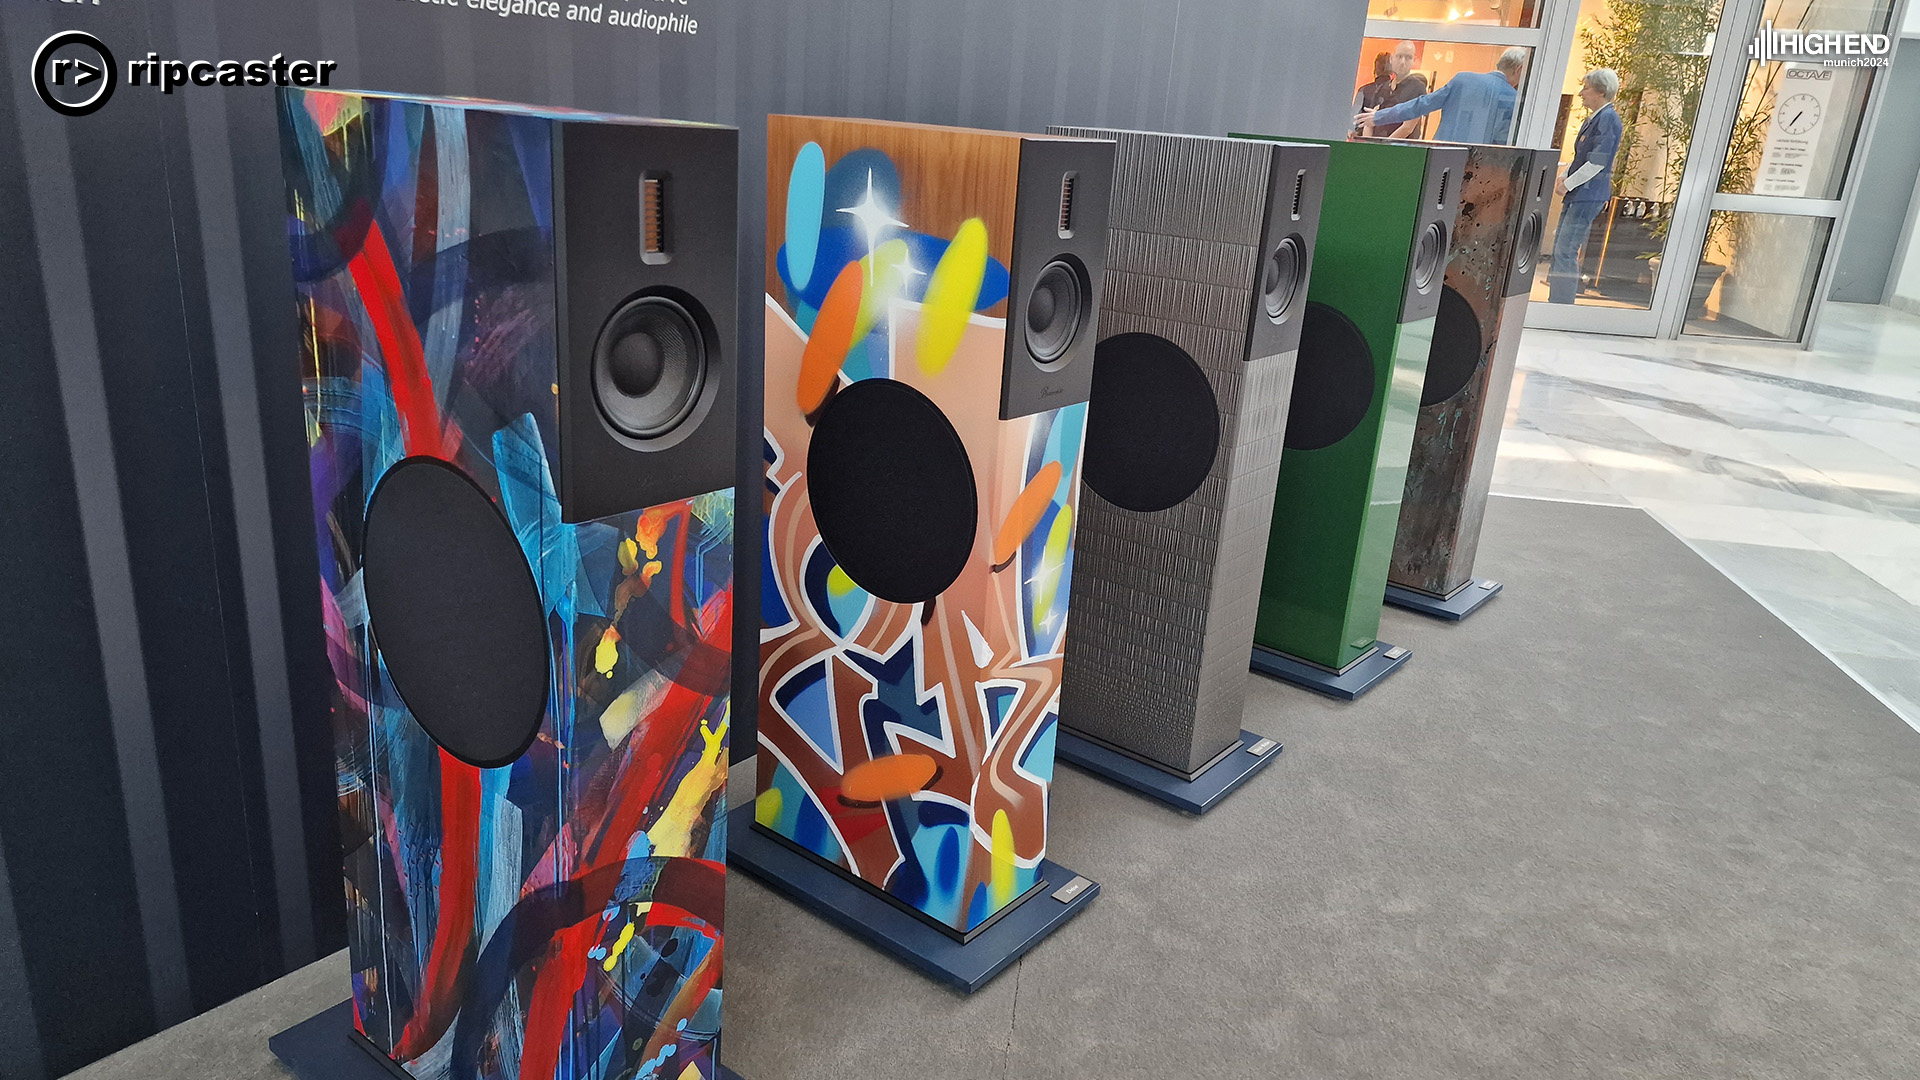 The same style of floorstanding loudspeaker lined up each one is a different colour.  Two of them have very colourful patterns on.